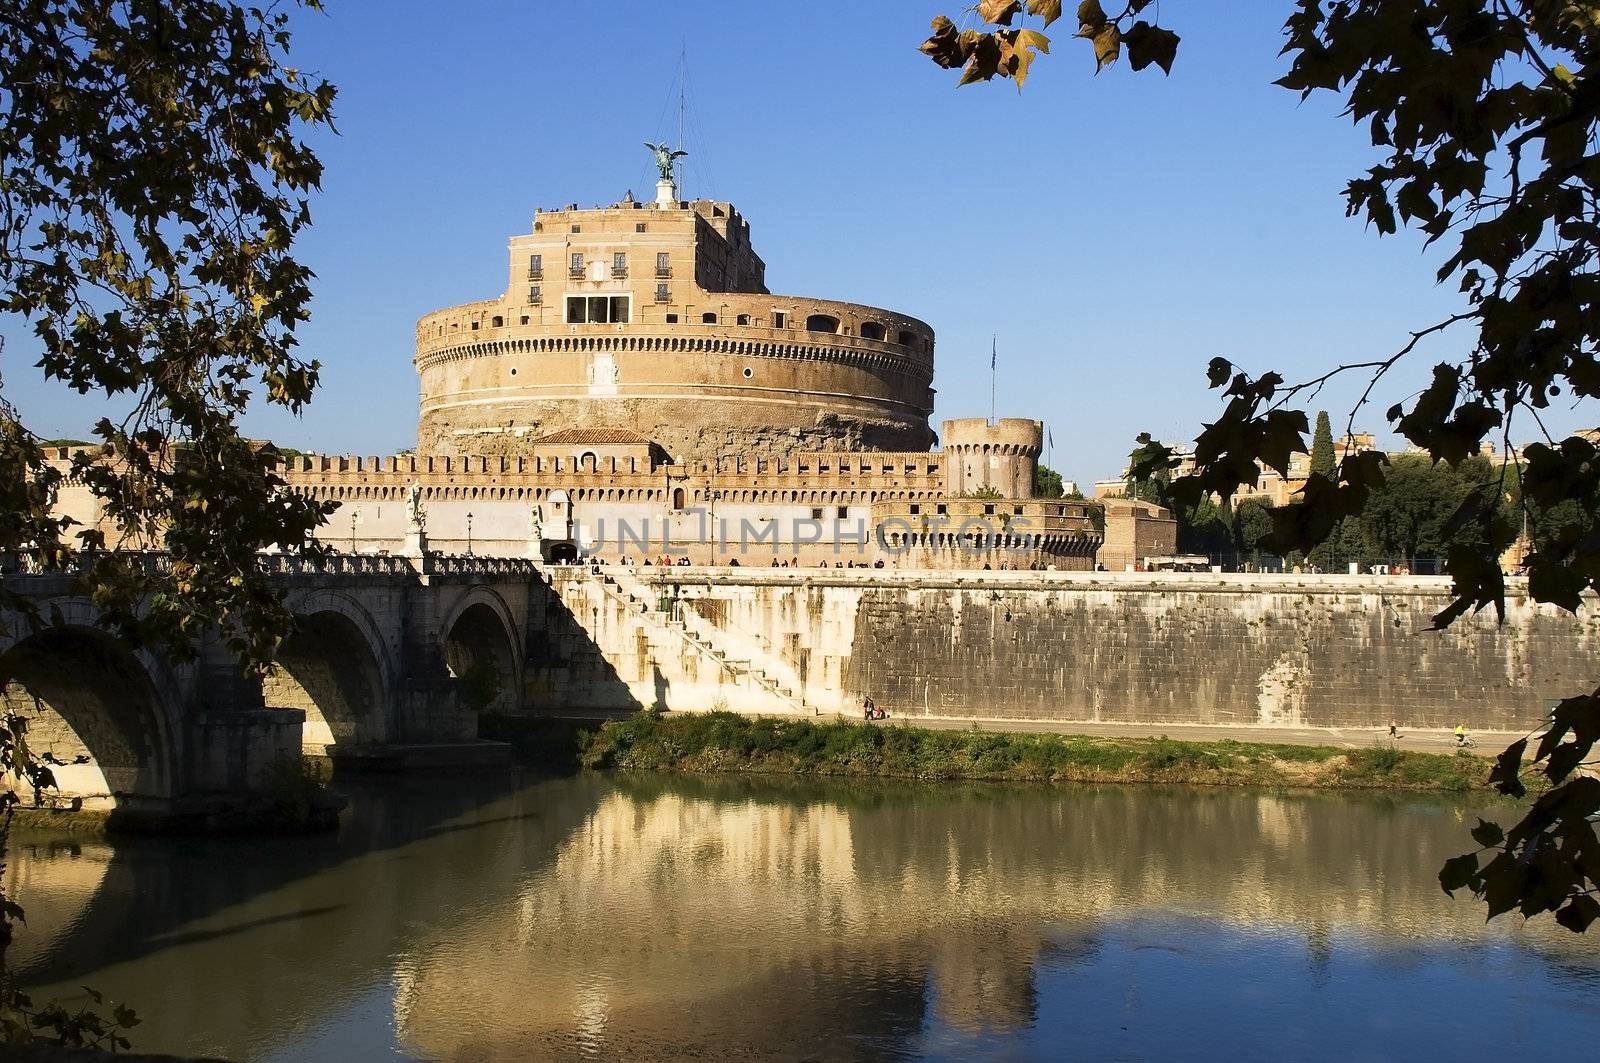 View of Castle Sant'Angelo, the Tiber River and Bridge, Rome, Italy